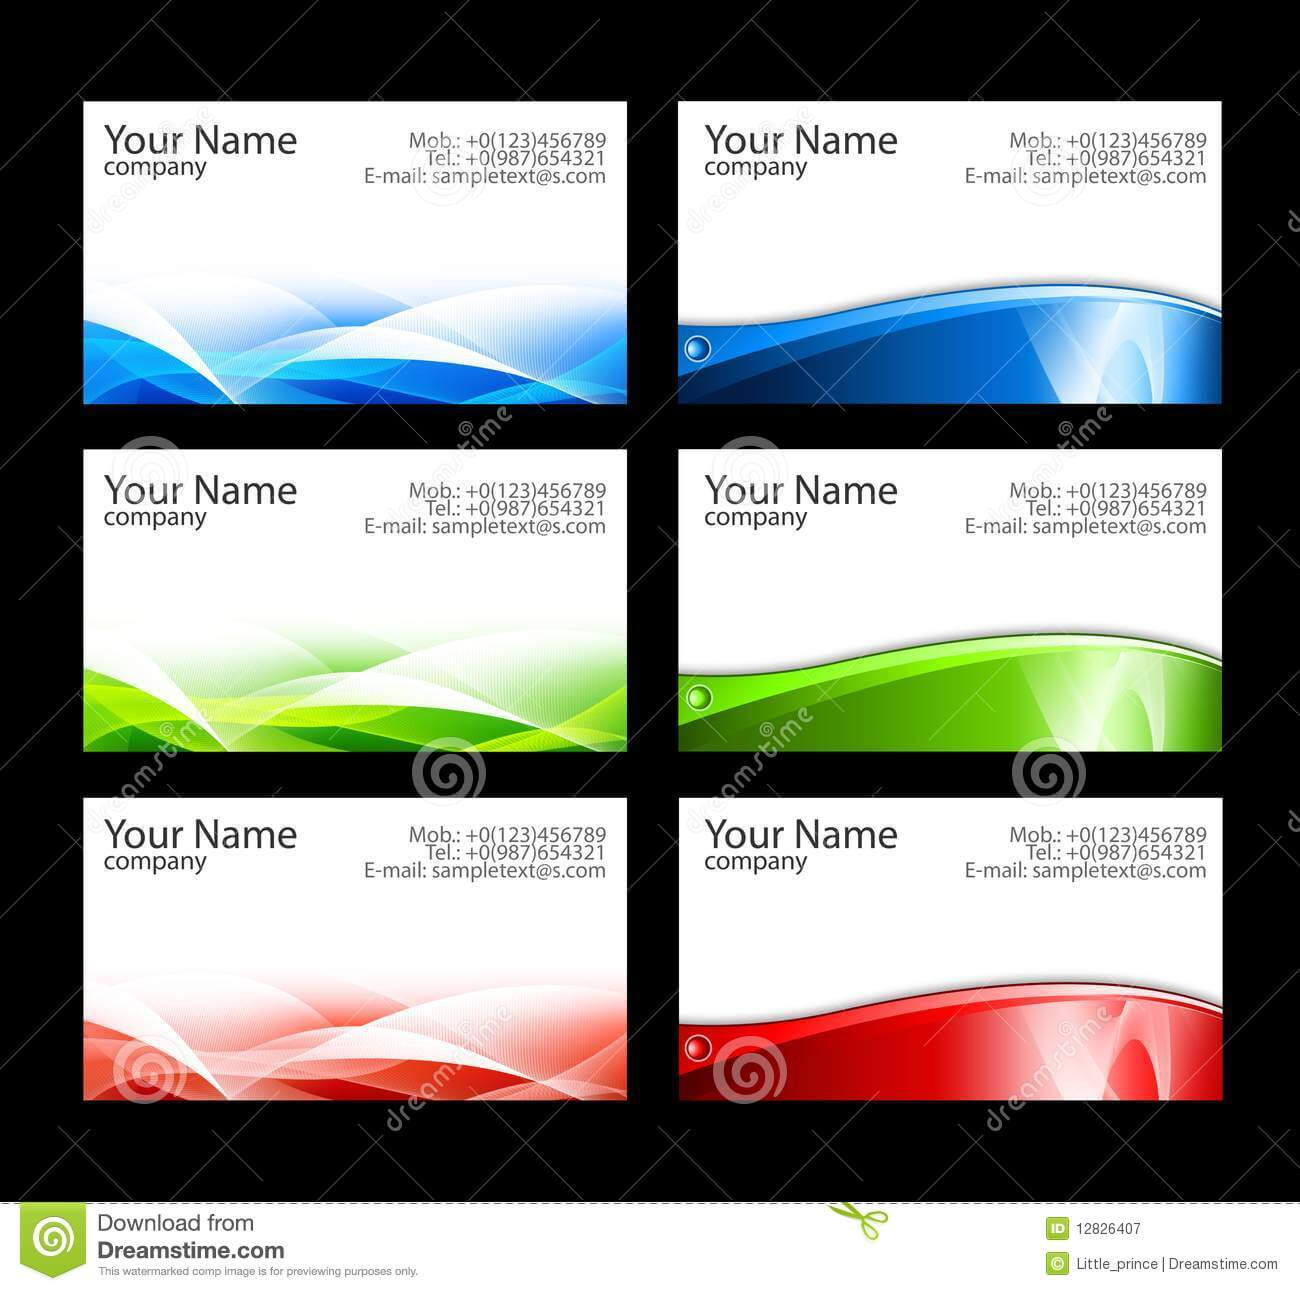 15 Free Avery Business Card Templates Images – Free Business For Free Complimentary Card Templates